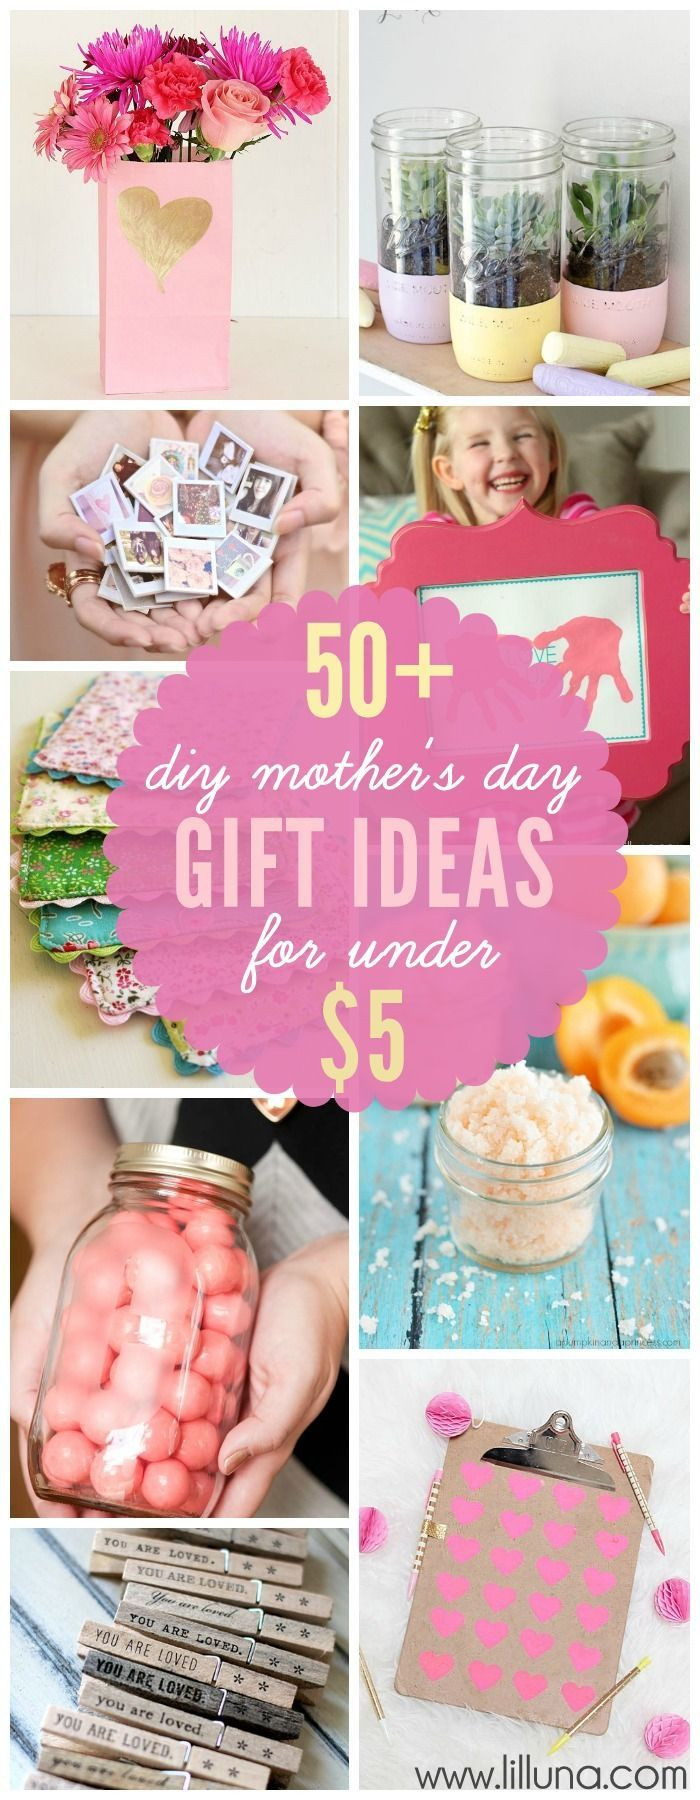 Mother'S Day Gift Ideas Pinterest
 74 best images about DIY Mothers Day Gifts on Pinterest